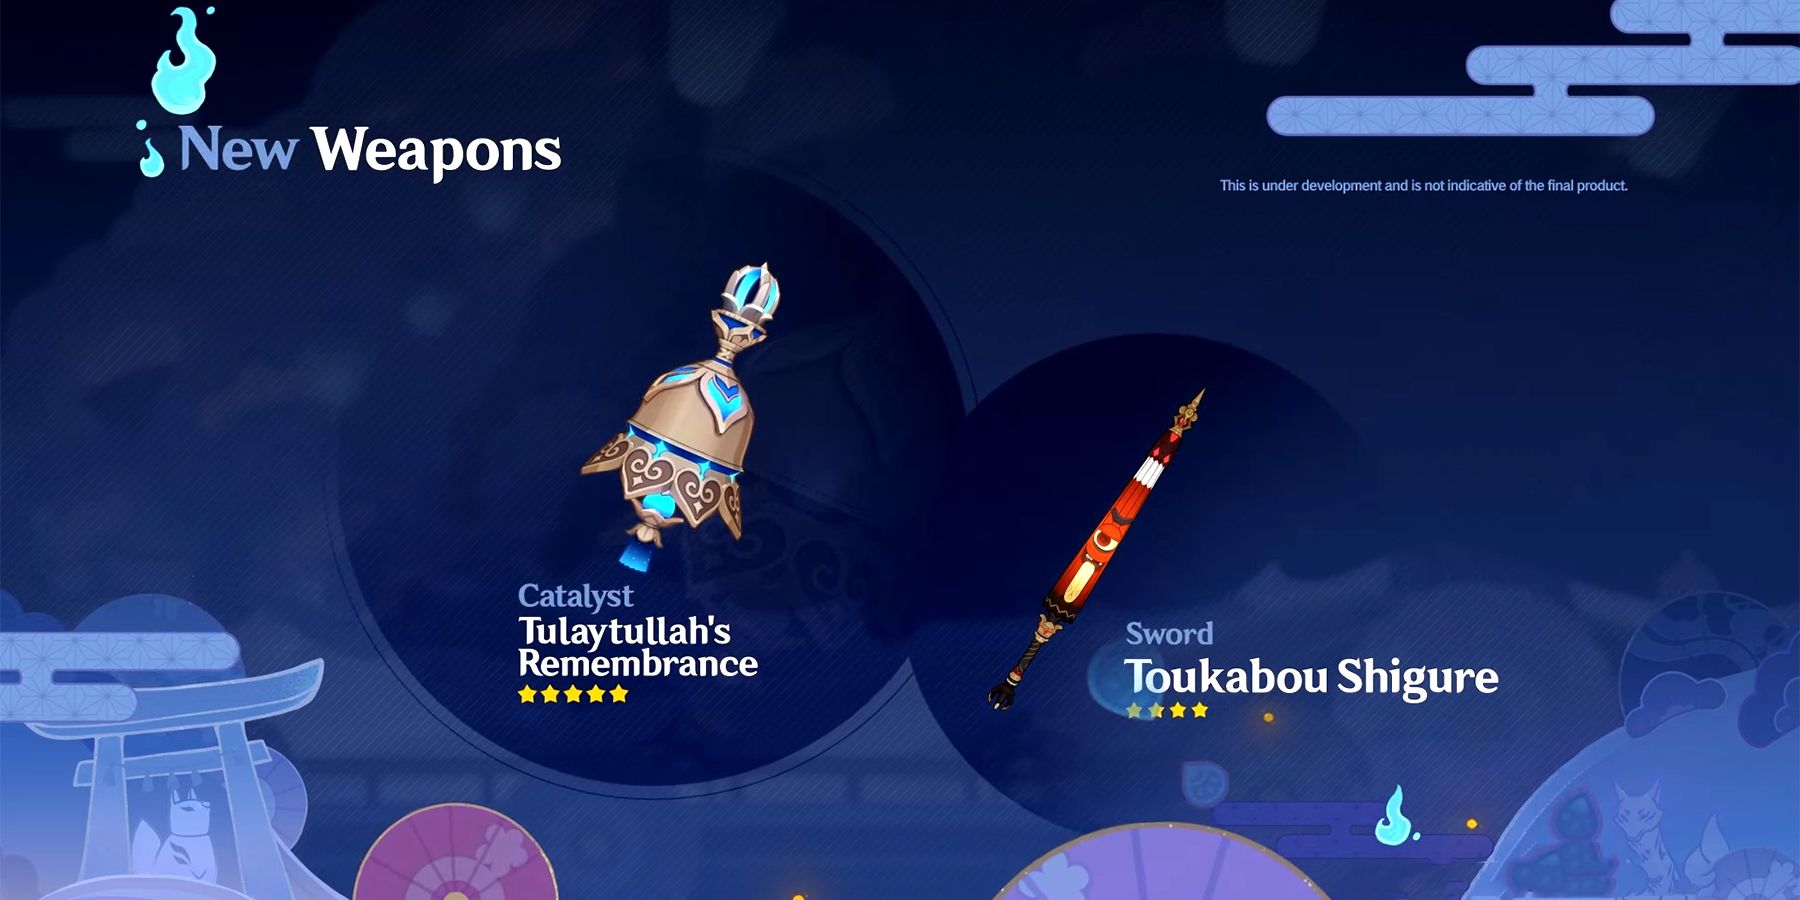 new weapons 3.3 tokabou shigune and tulayyullah’s remembrance in genshin impact